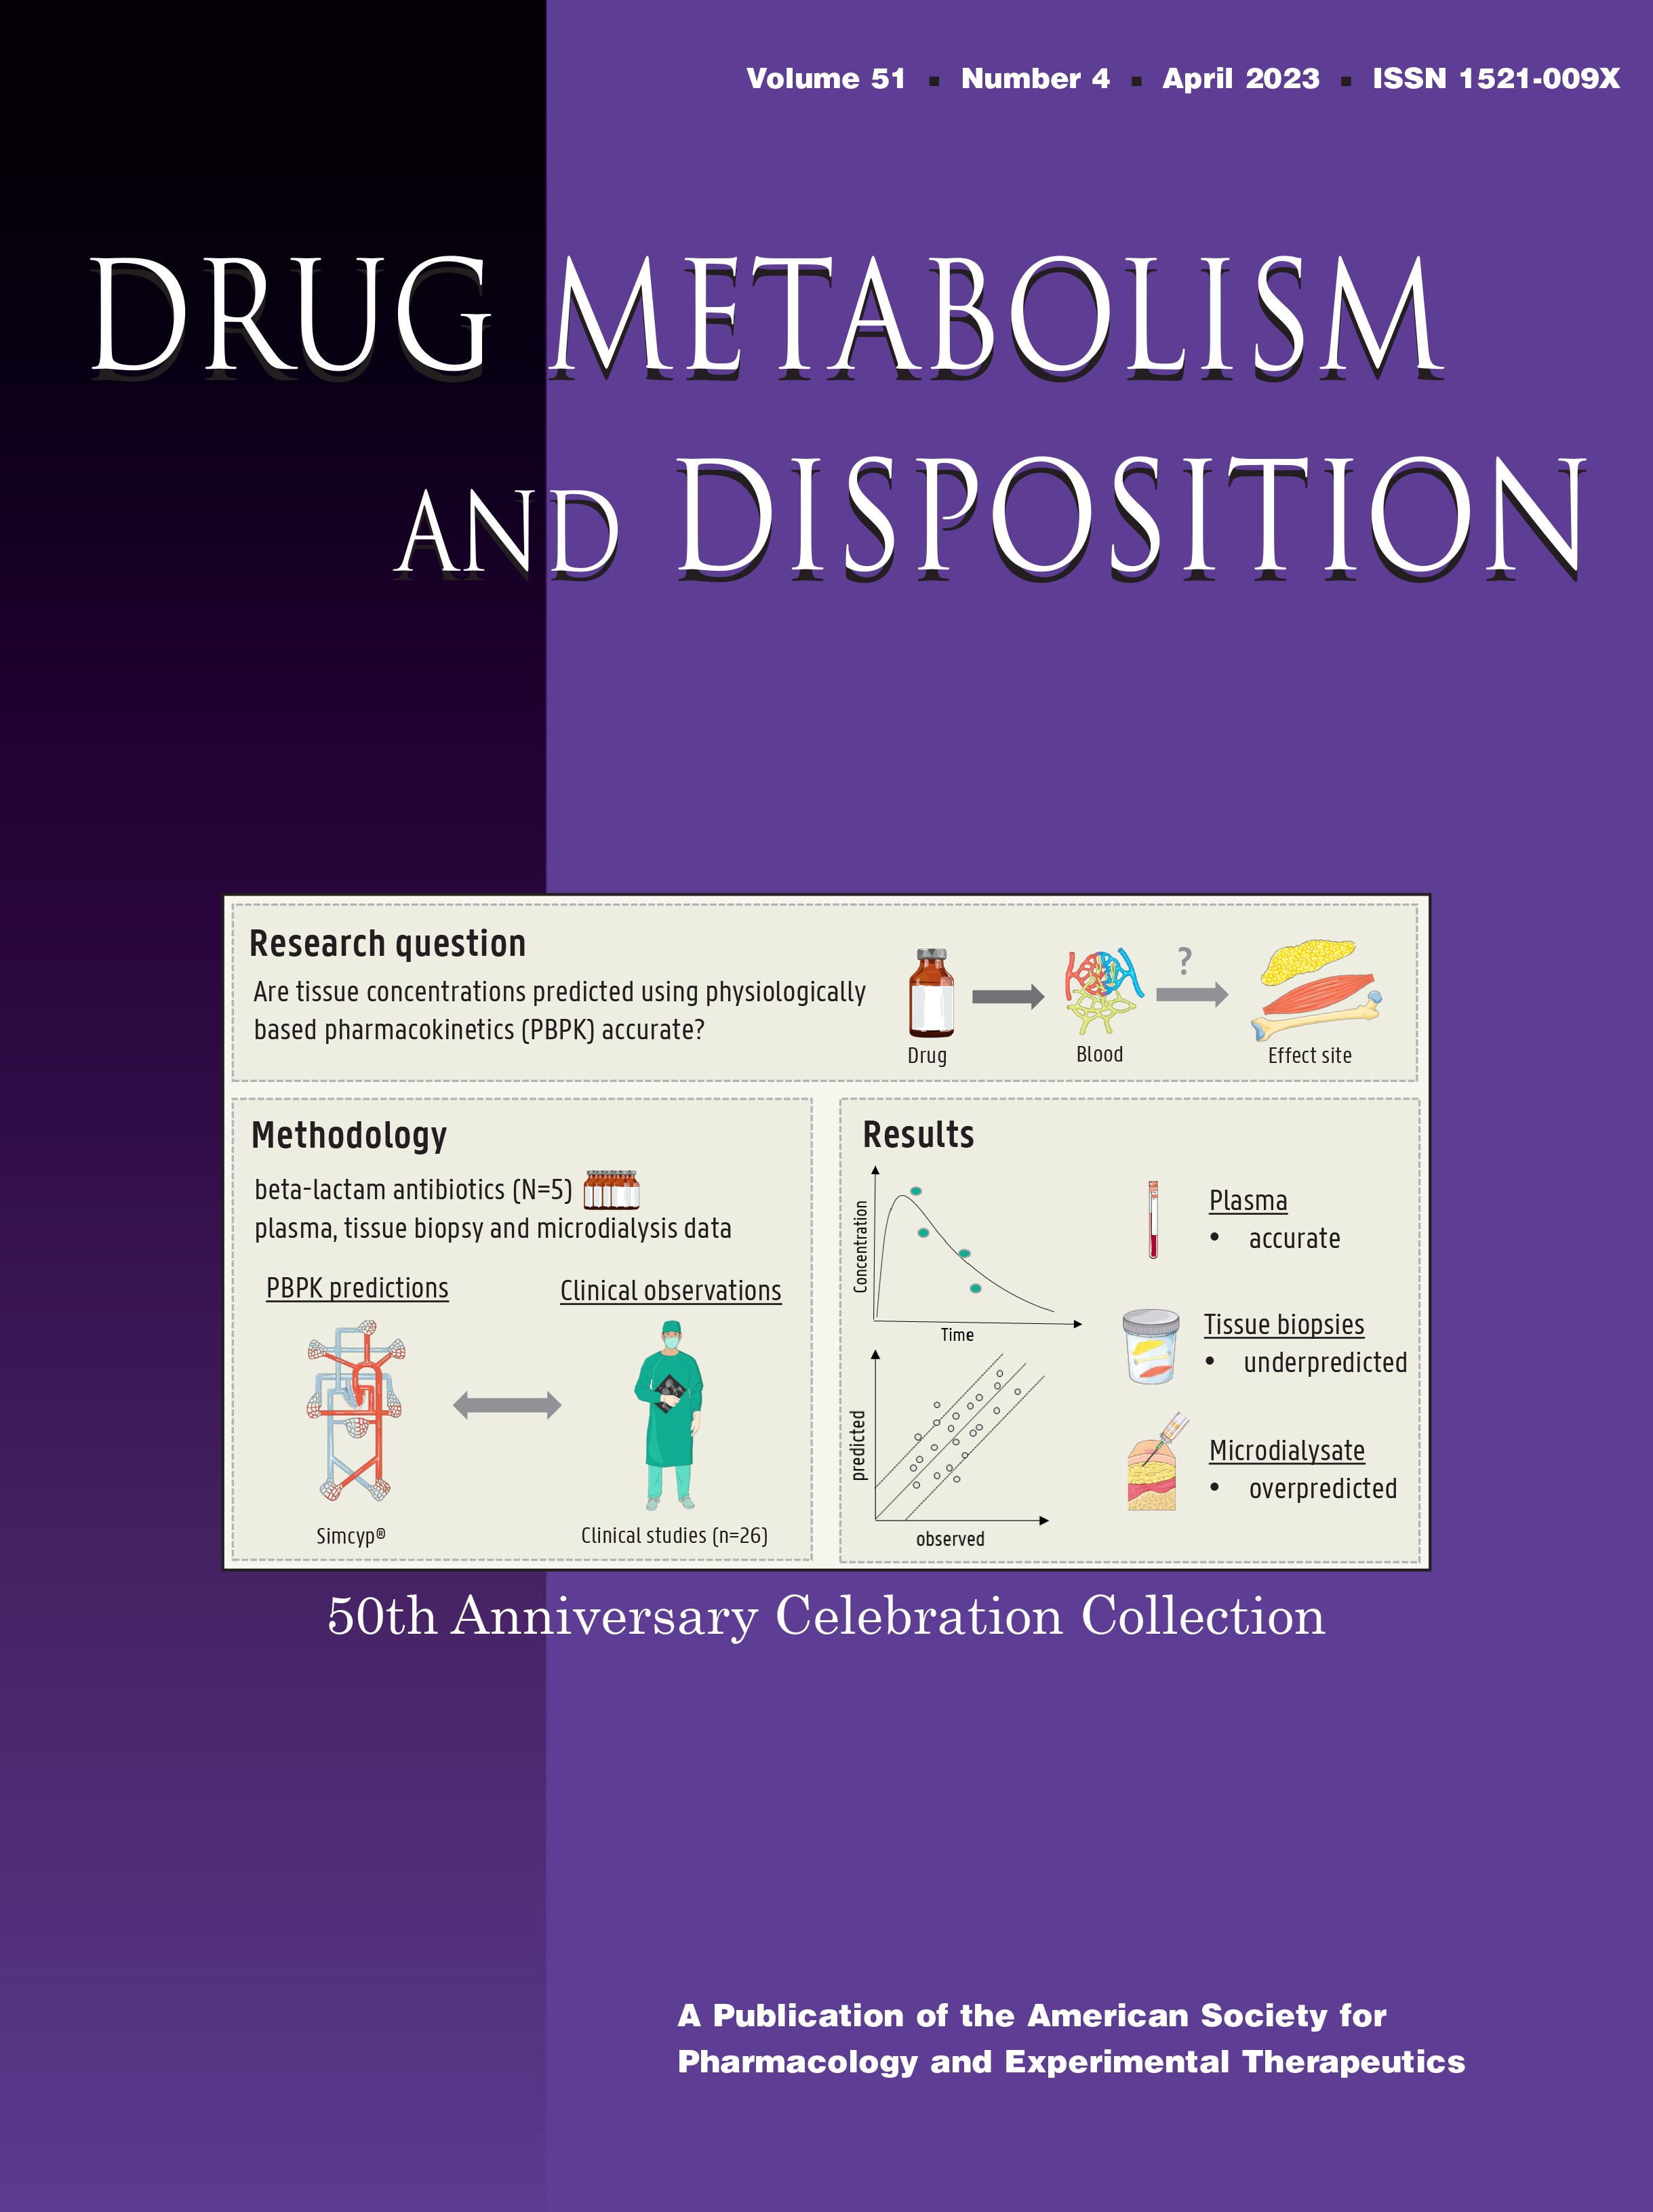 Application of Accelerator Mass Spectrometry to Characterize the Mass Balance Recovery and Disposition of AZD4831, a Novel Myeloperoxidase Inhibitor, following Administration of an Oral Radiolabeled Microtracer Dose in Humans [Articles]